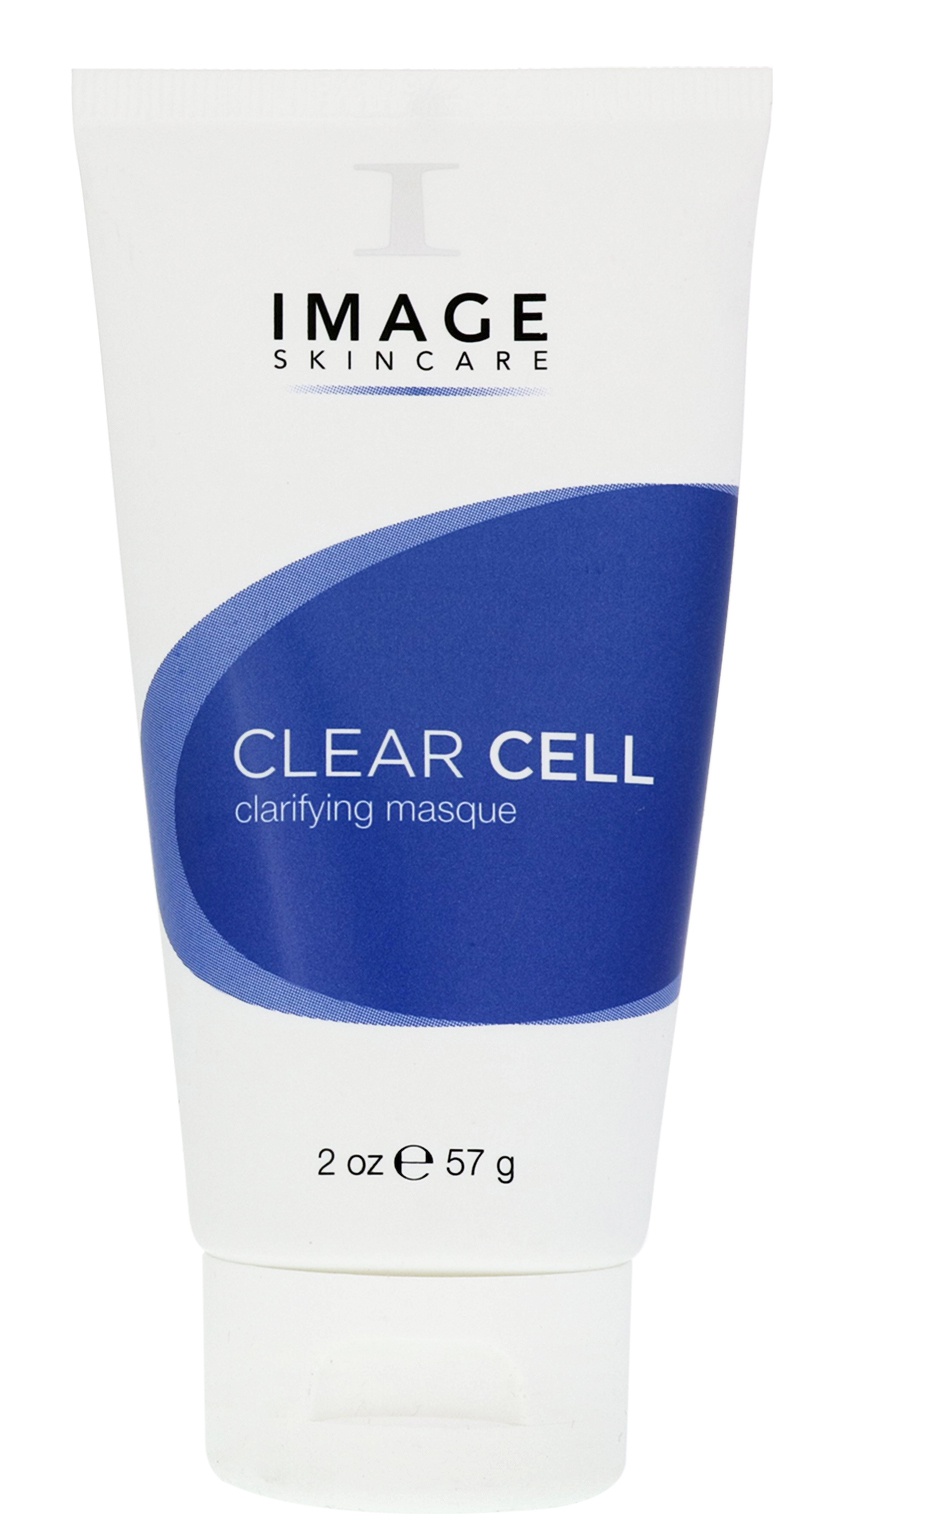 Image Skincare Clear Cell - Clarifying Masque